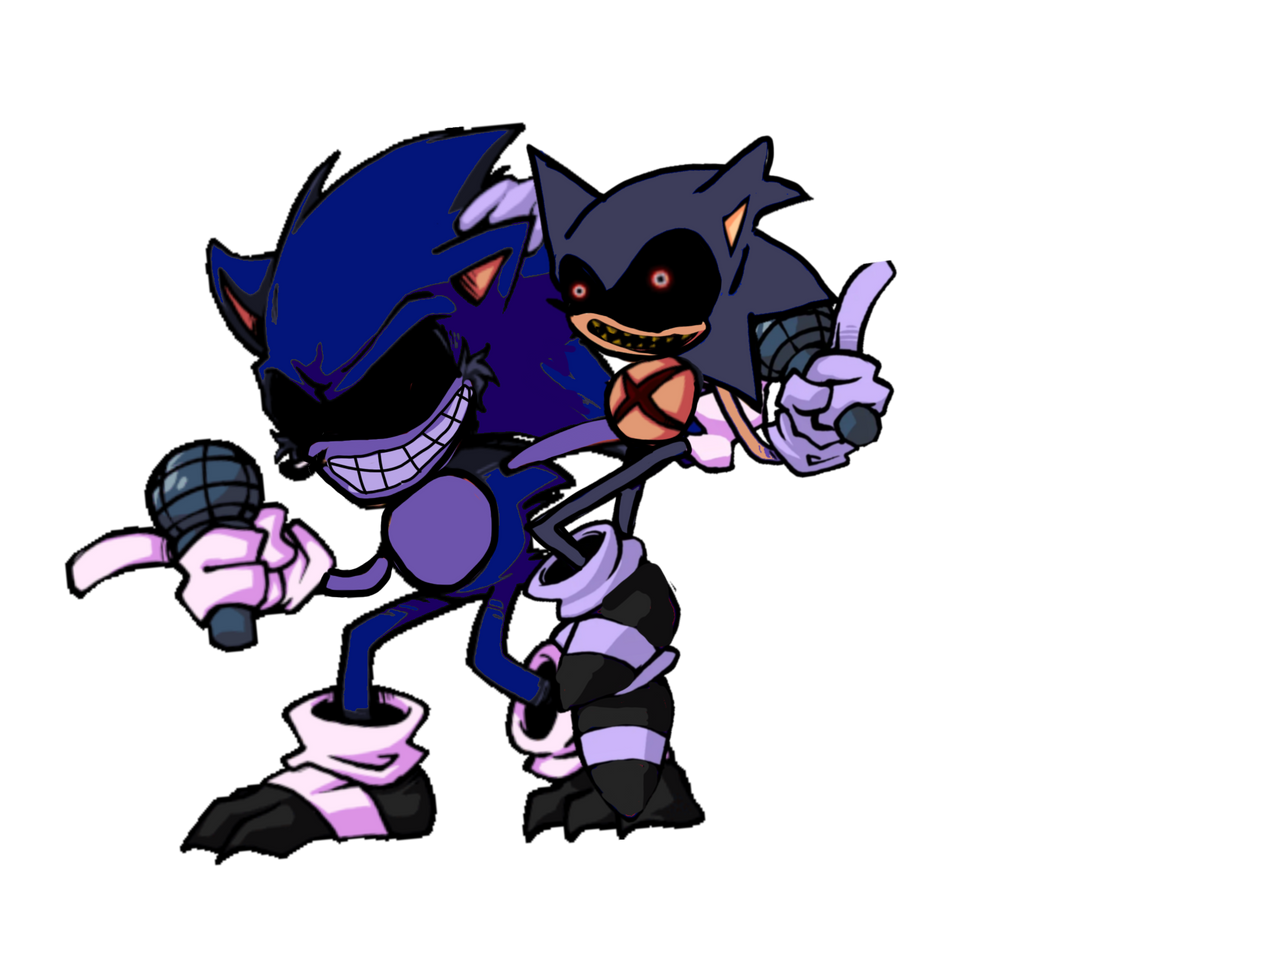 Lord X Sonic by TheCyanTailsFan on DeviantArt